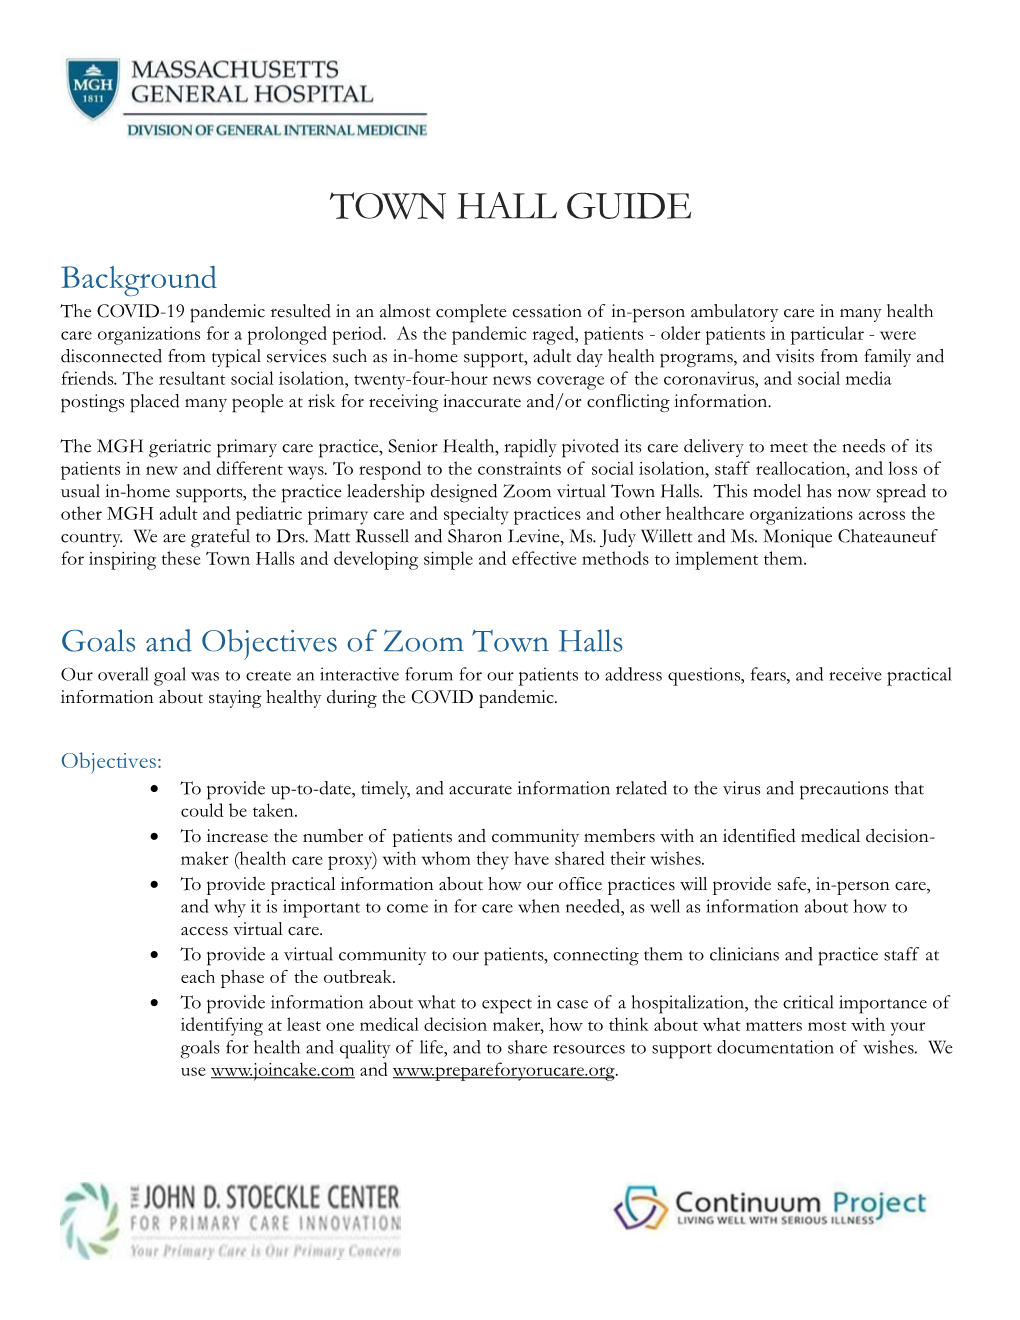 Town Hall Guide